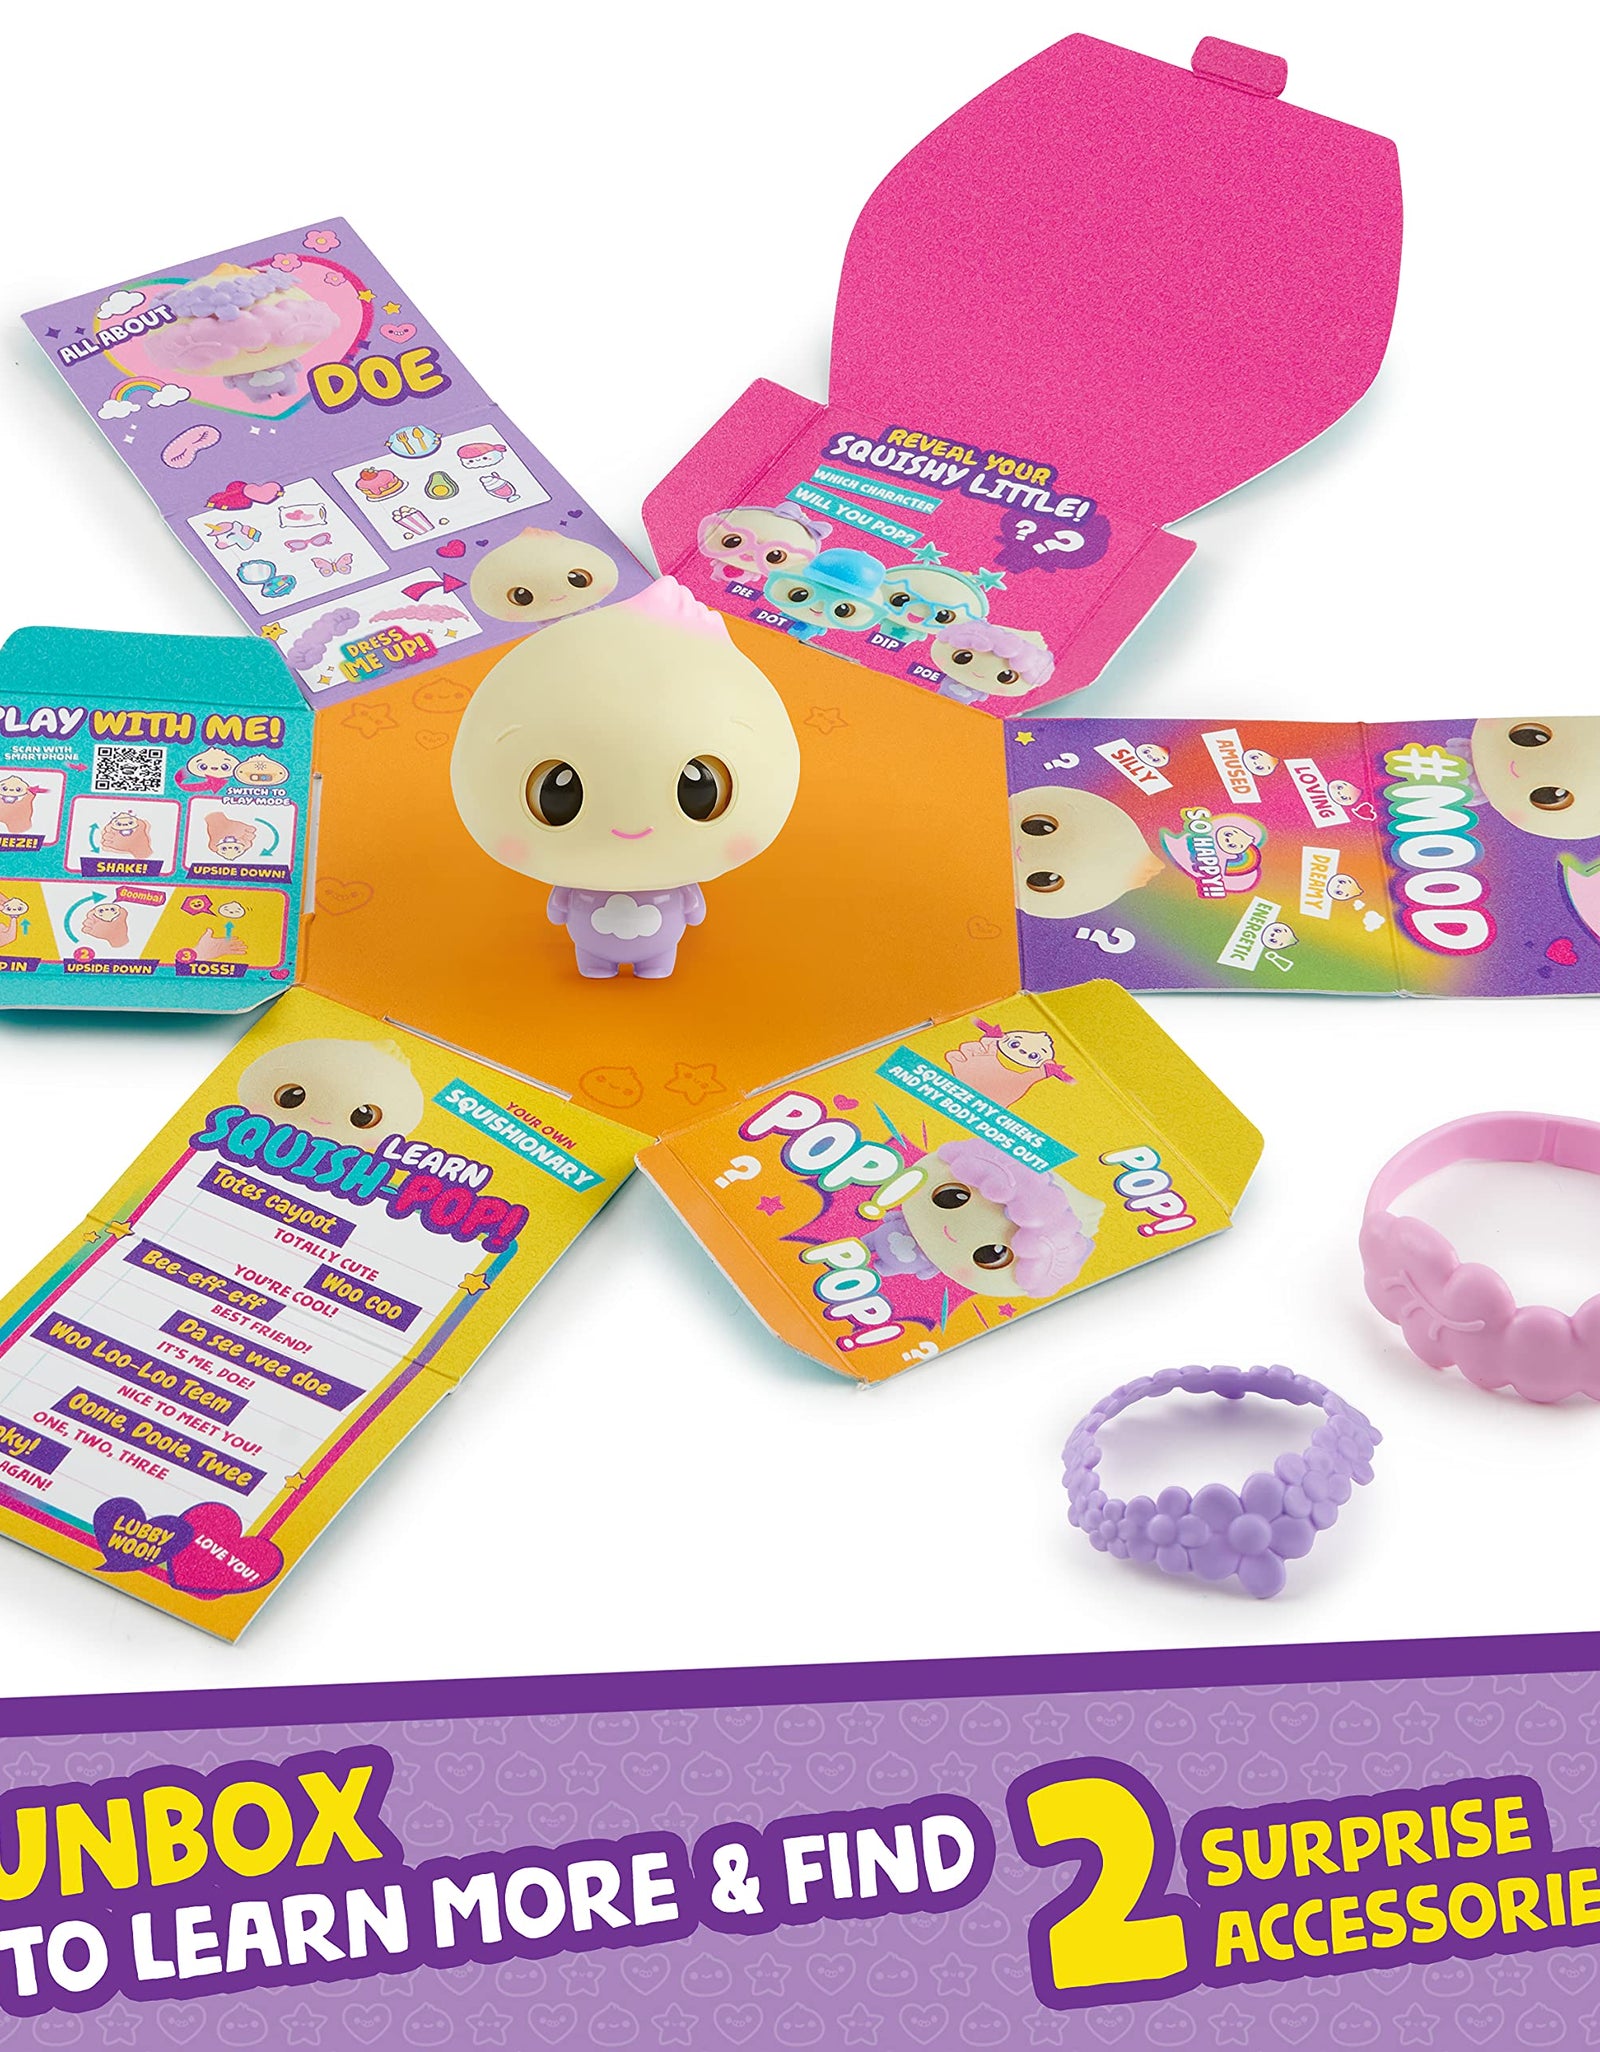 My Squishy Little Dumplings – Interactive Doll Collectible With Accessories – Doe (Purple)